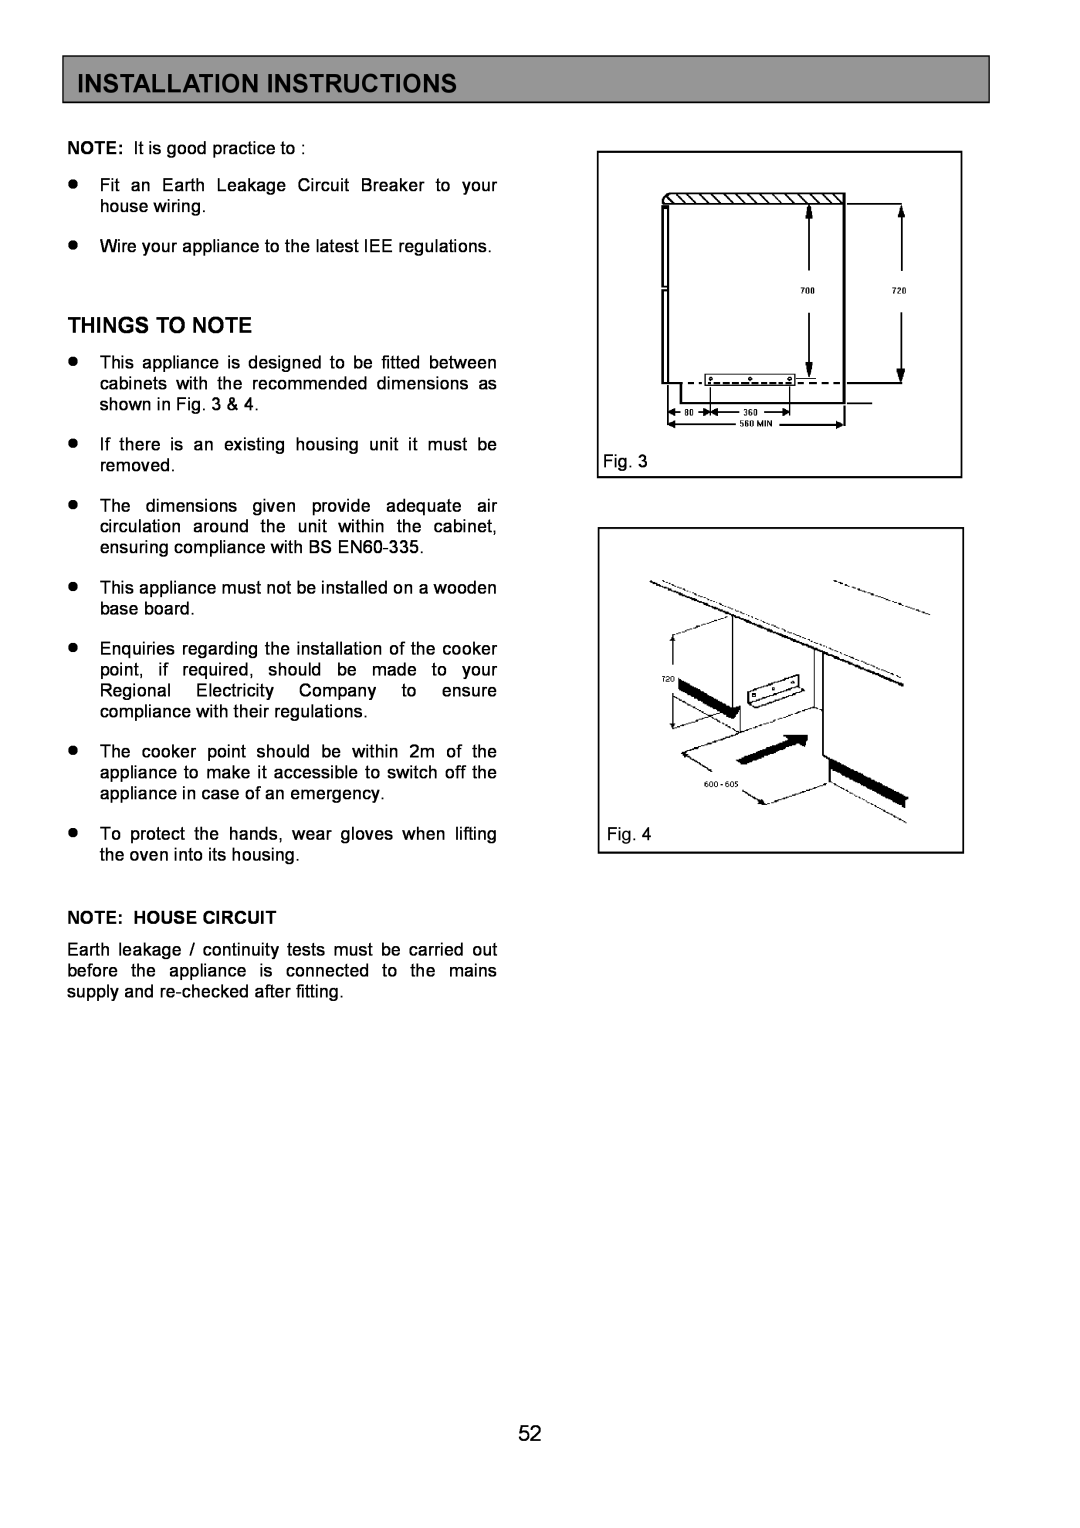 Zanussi 311608901 manual Note House Circuit, Installation Instructions, Things To Note 